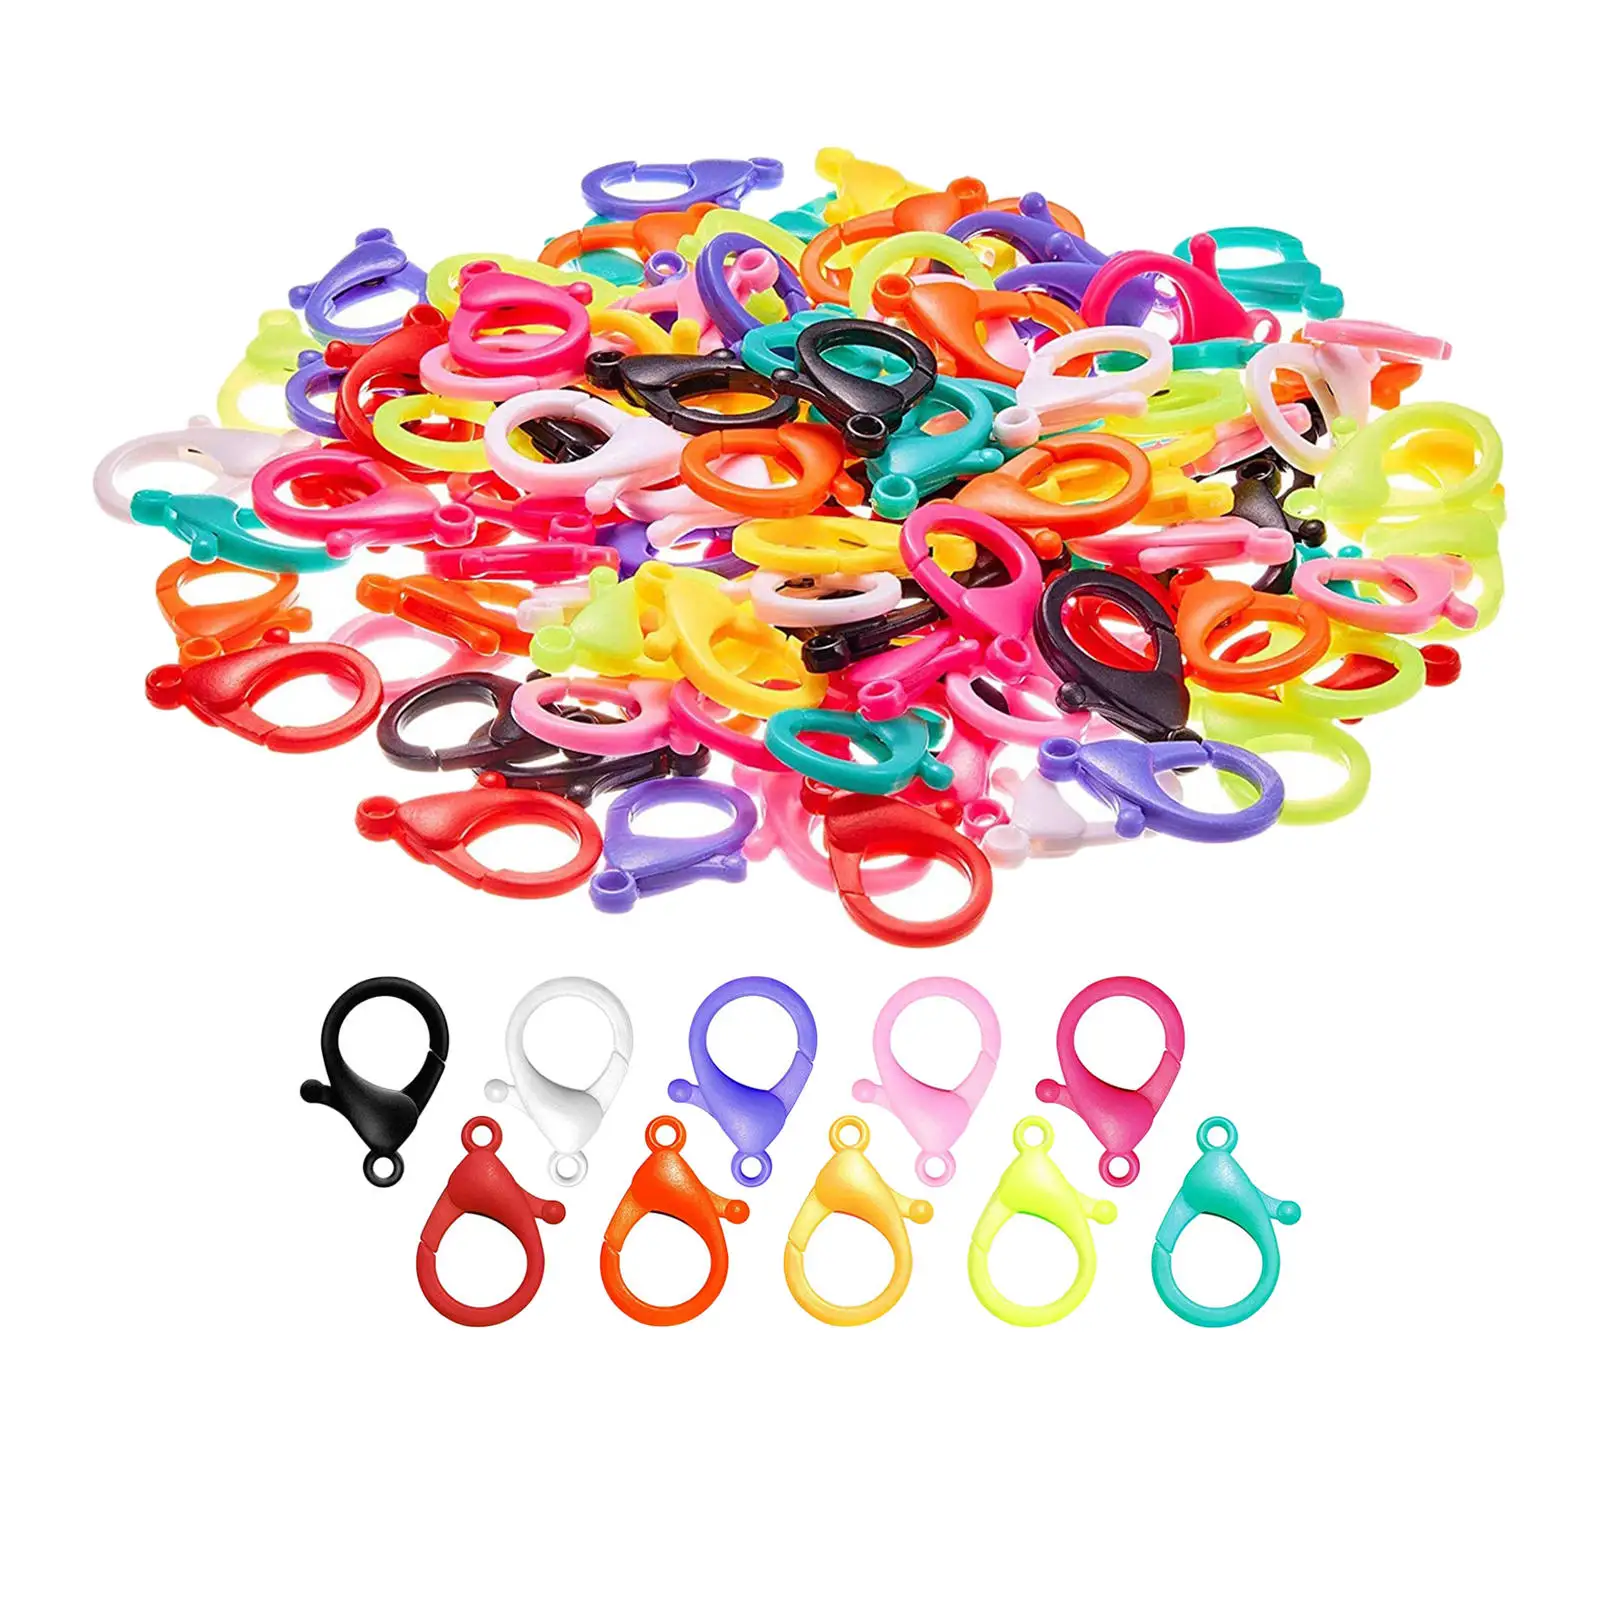 100 Pcs Carabiners with Carabiner Snap Hooks for Keychain Bags Candy Colorful Acrylic Lobster Clasps Hooks Key Chain Key Rings